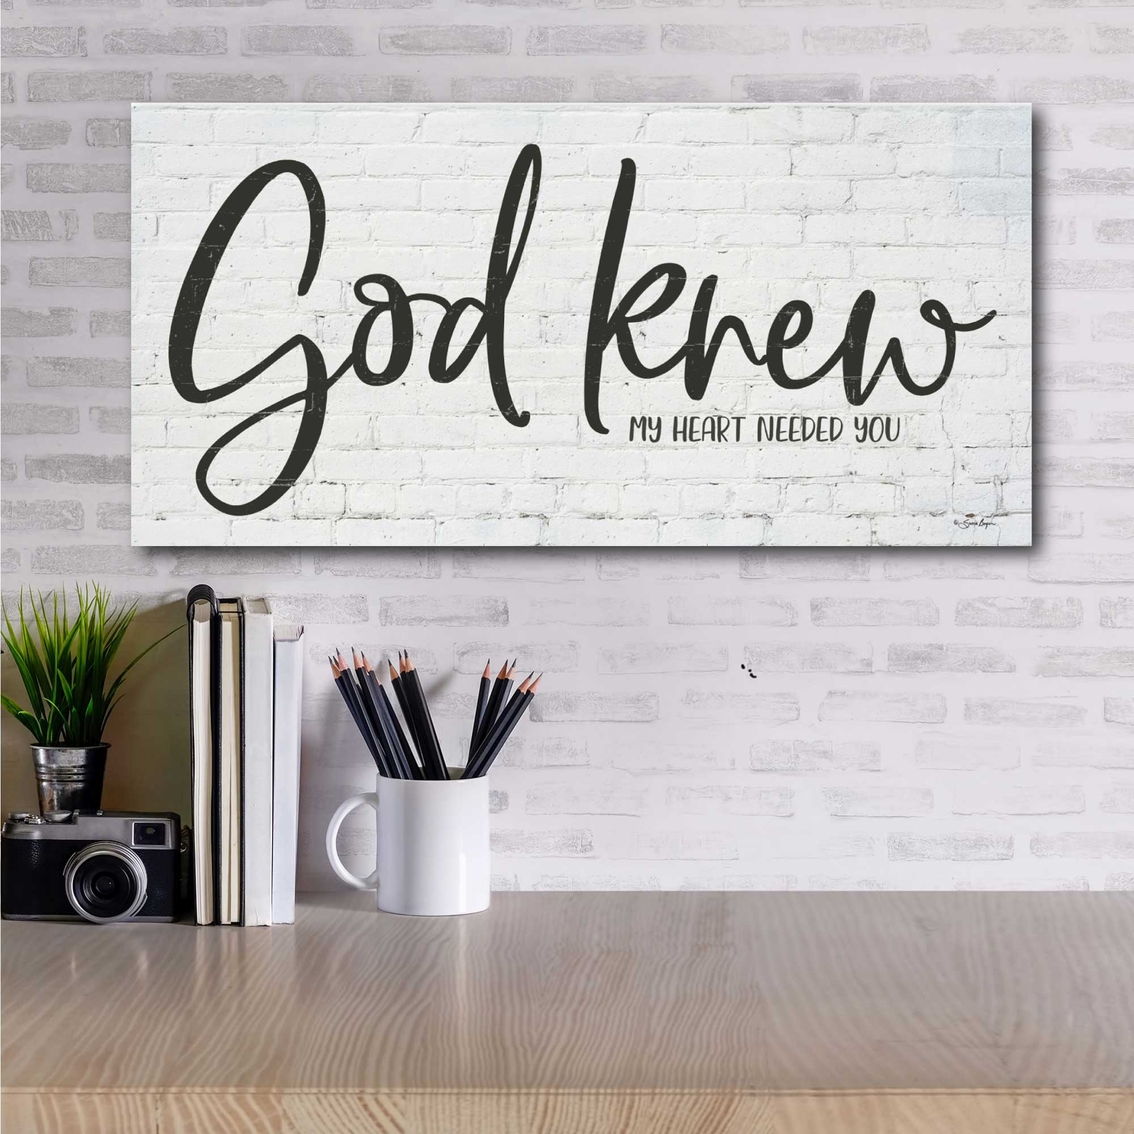 Courtside Market God Knows Canvas Wall Art - Image 2 of 2